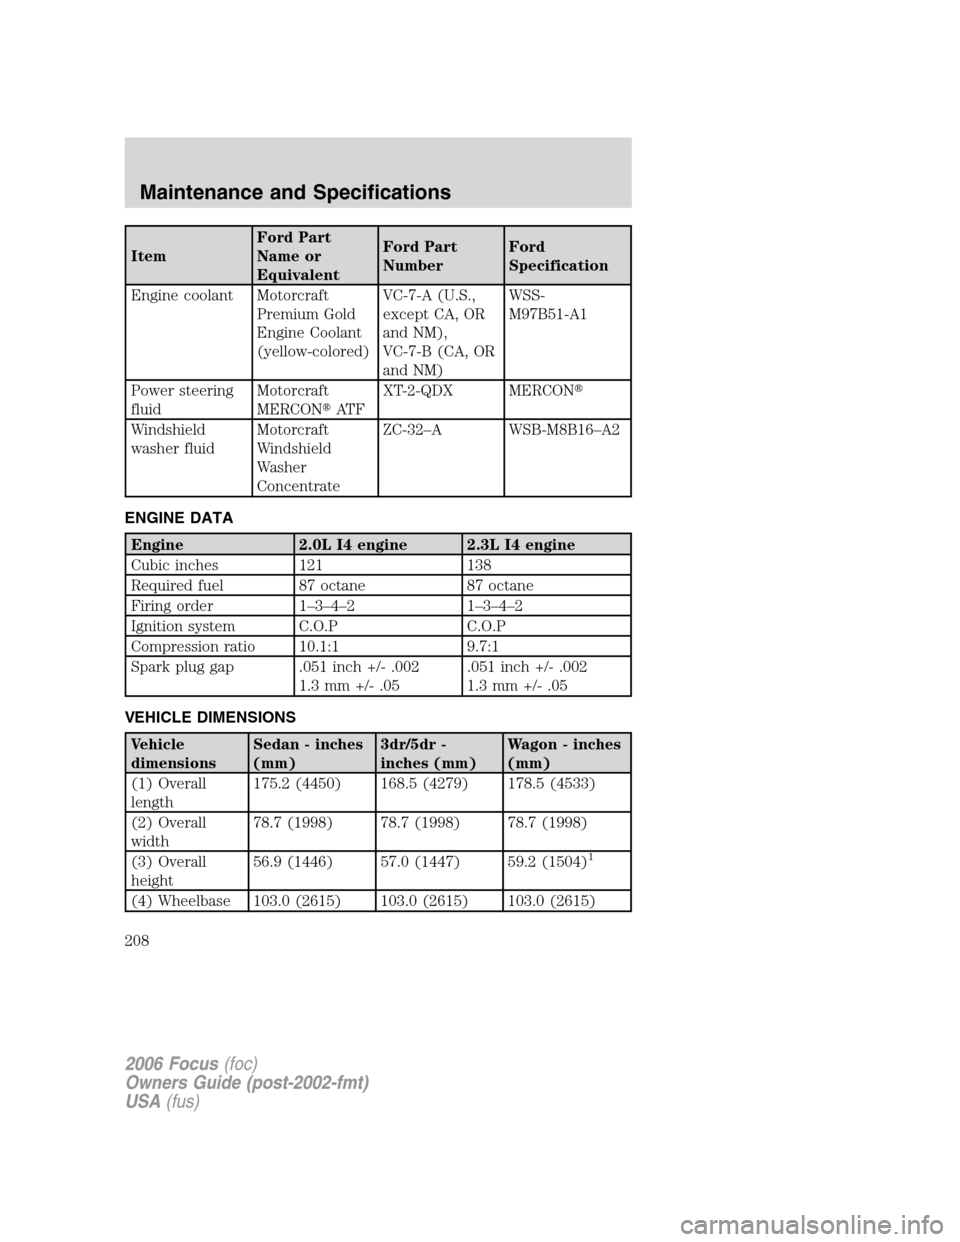 FORD FOCUS 2006 2.G Manual PDF ItemFord Part
Name or
EquivalentFord Part
NumberFord
Specification
Engine coolant Motorcraft
Premium Gold
Engine Coolant
(yellow-colored)VC-7-A (U.S.,
except CA, OR
and NM),
VC-7-B (CA, OR
and NM)WSS-